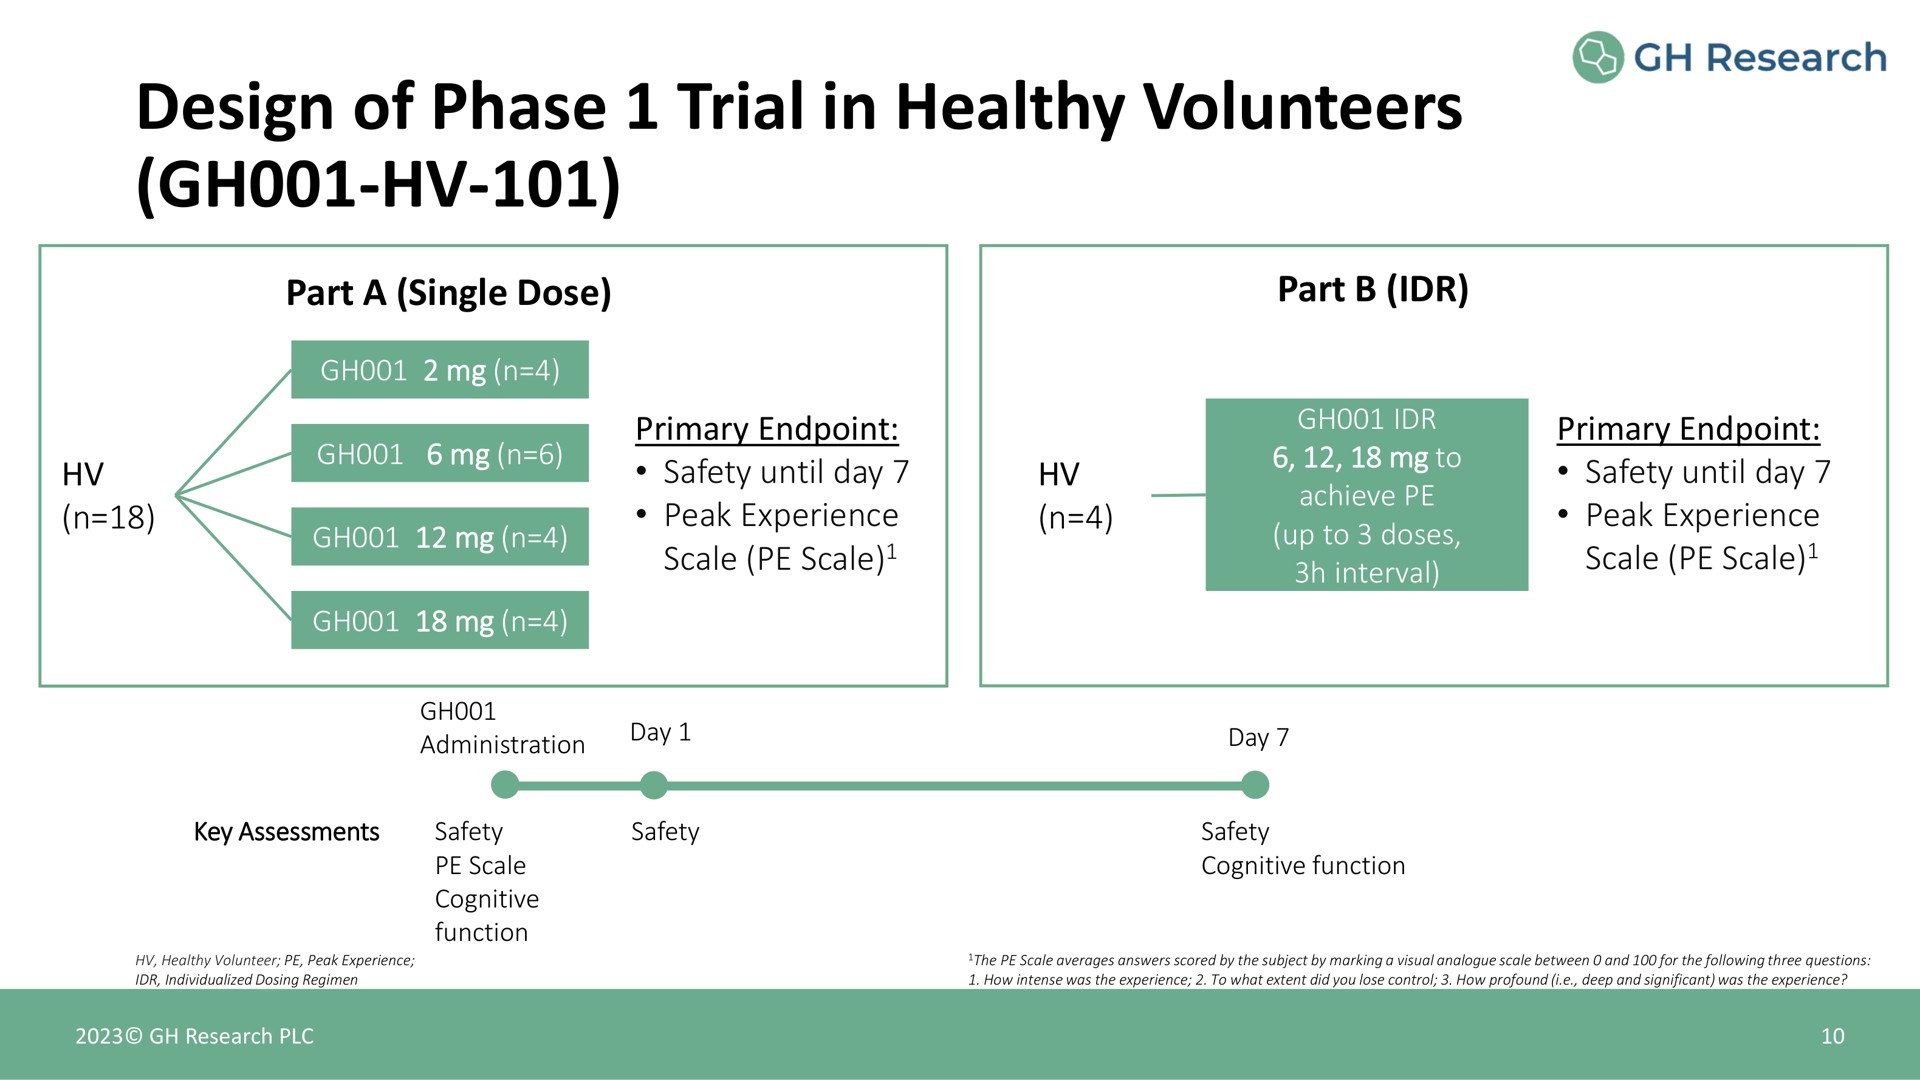 design of phase trial in healthy volunteers | GH Research